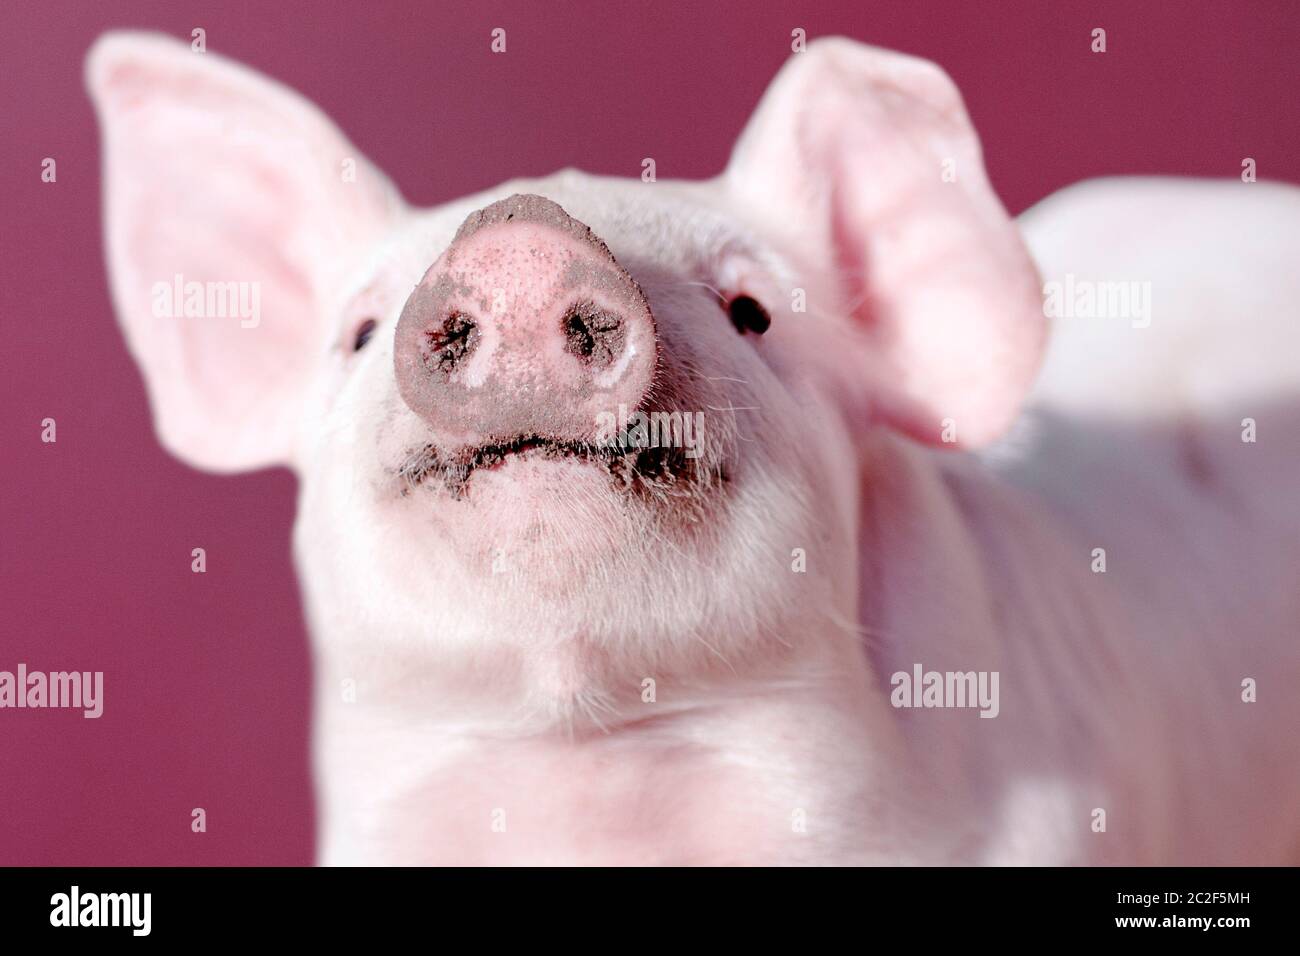 Snout of young pig on pink background, close-up photo. Stock Photo